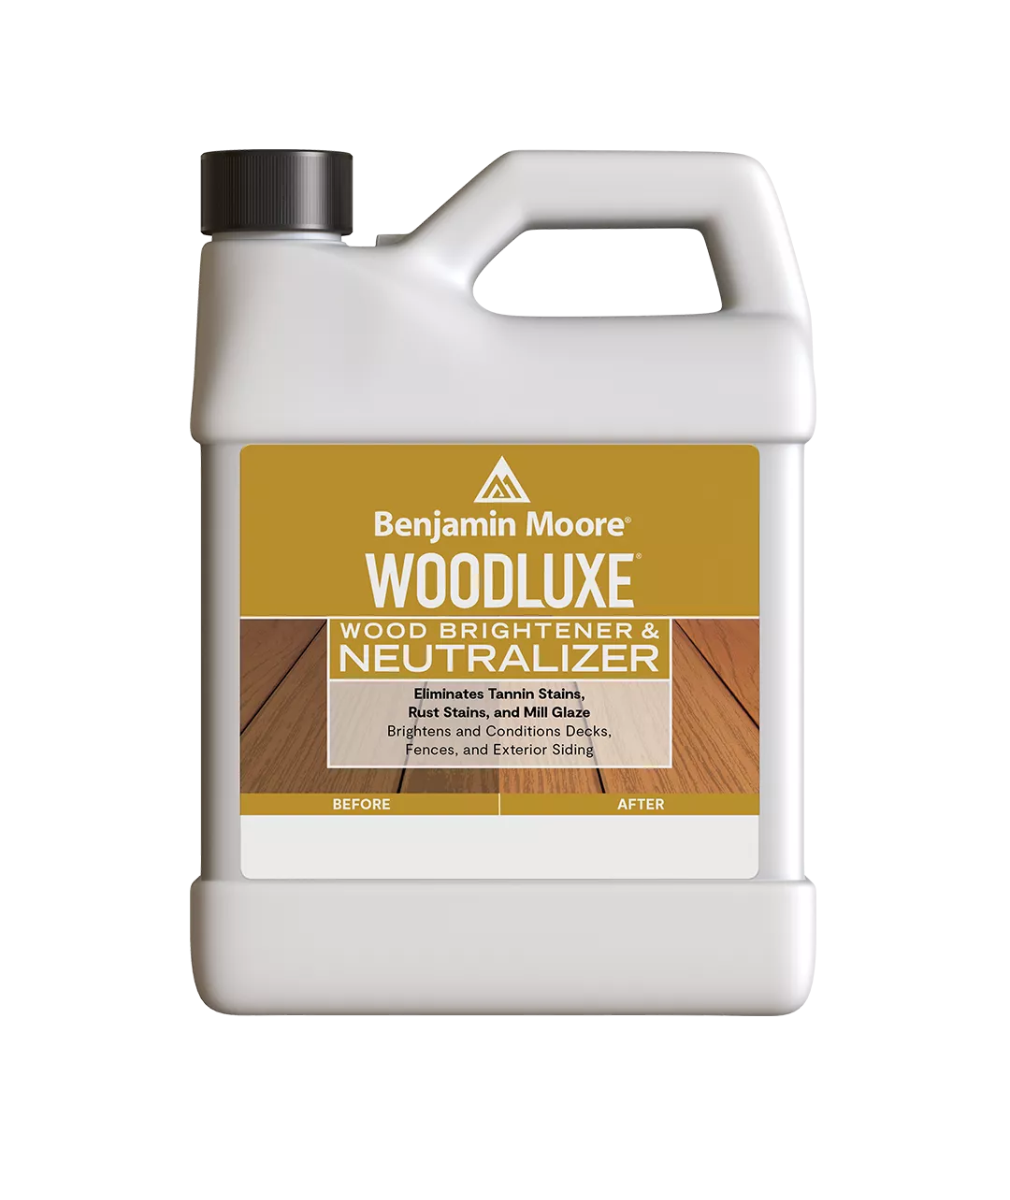 Benjamin Moore Woodluxe Wood Brightener &amp; Neutralizer Gallon available at JC Licht.